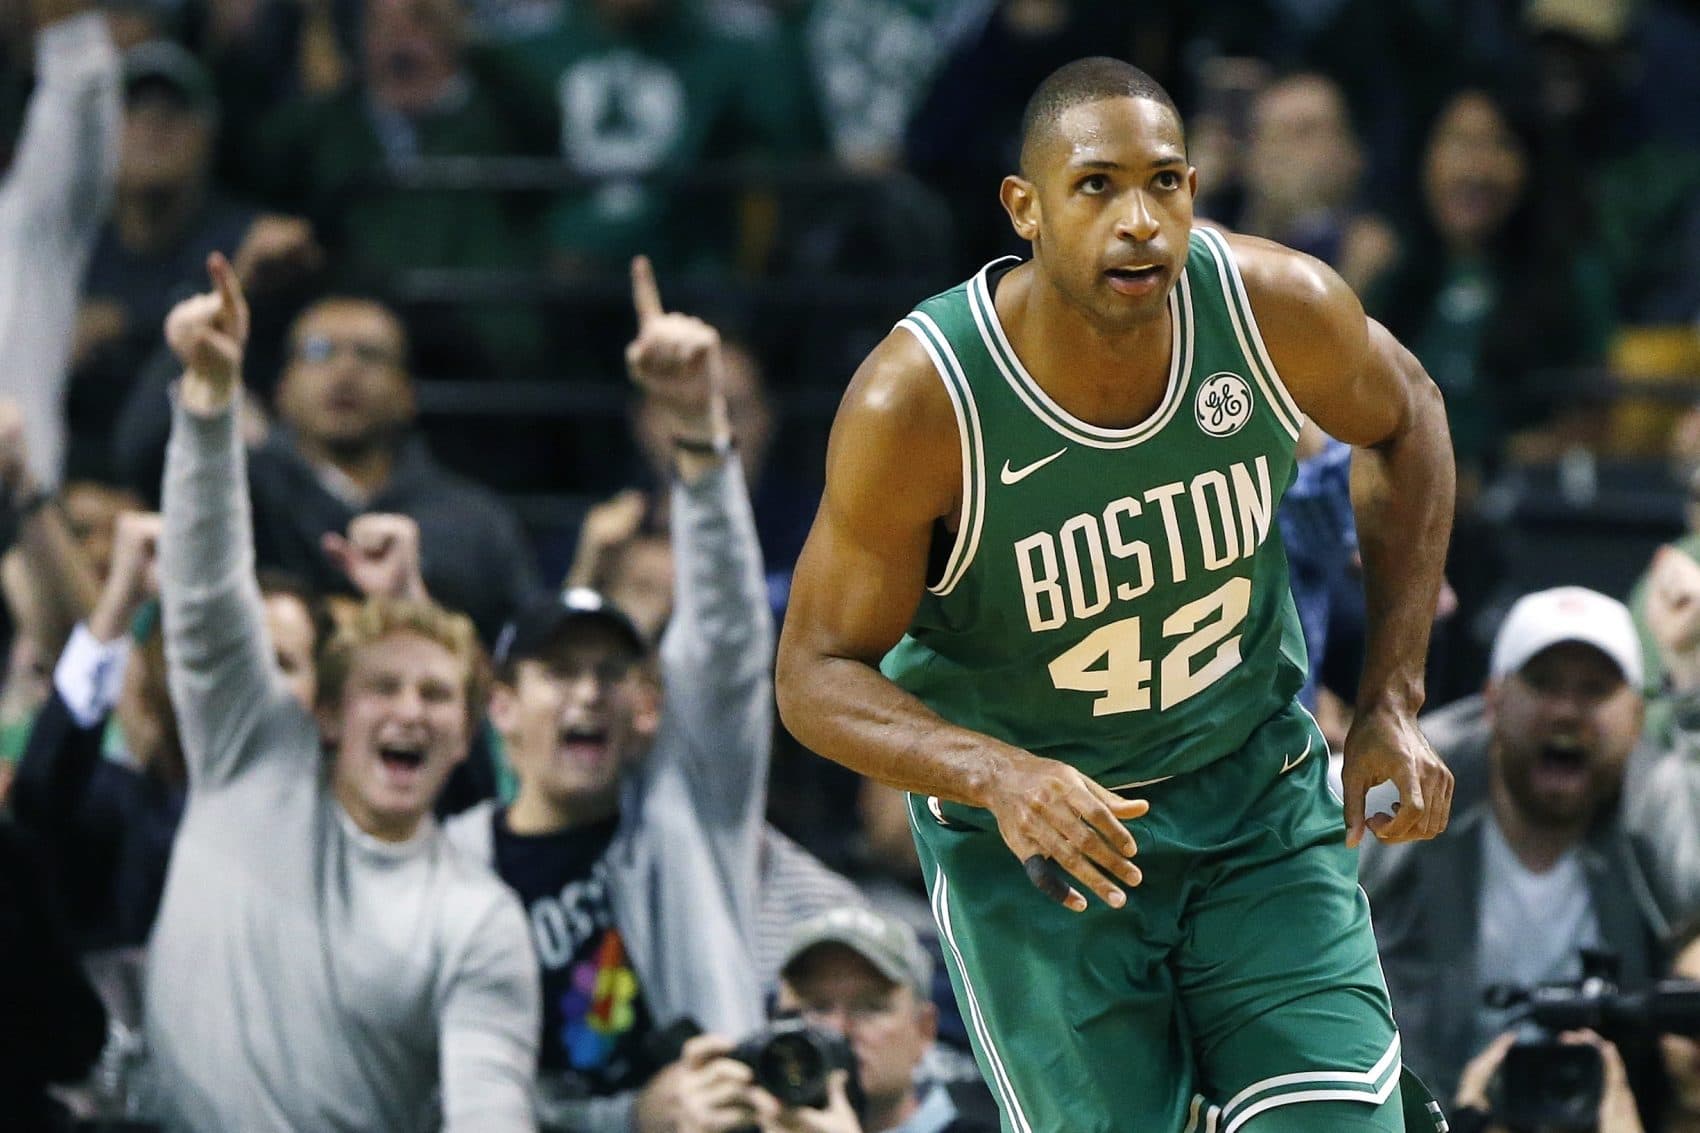 Boston Celtics' Al Horford heads court after scoring during the fourth quarter of an NBA basketball game against the Golden State Warriors in Boston, Thursday, Nov. 16, 2017. The Celtics won 92-88. (Michael Dwyer/AP)